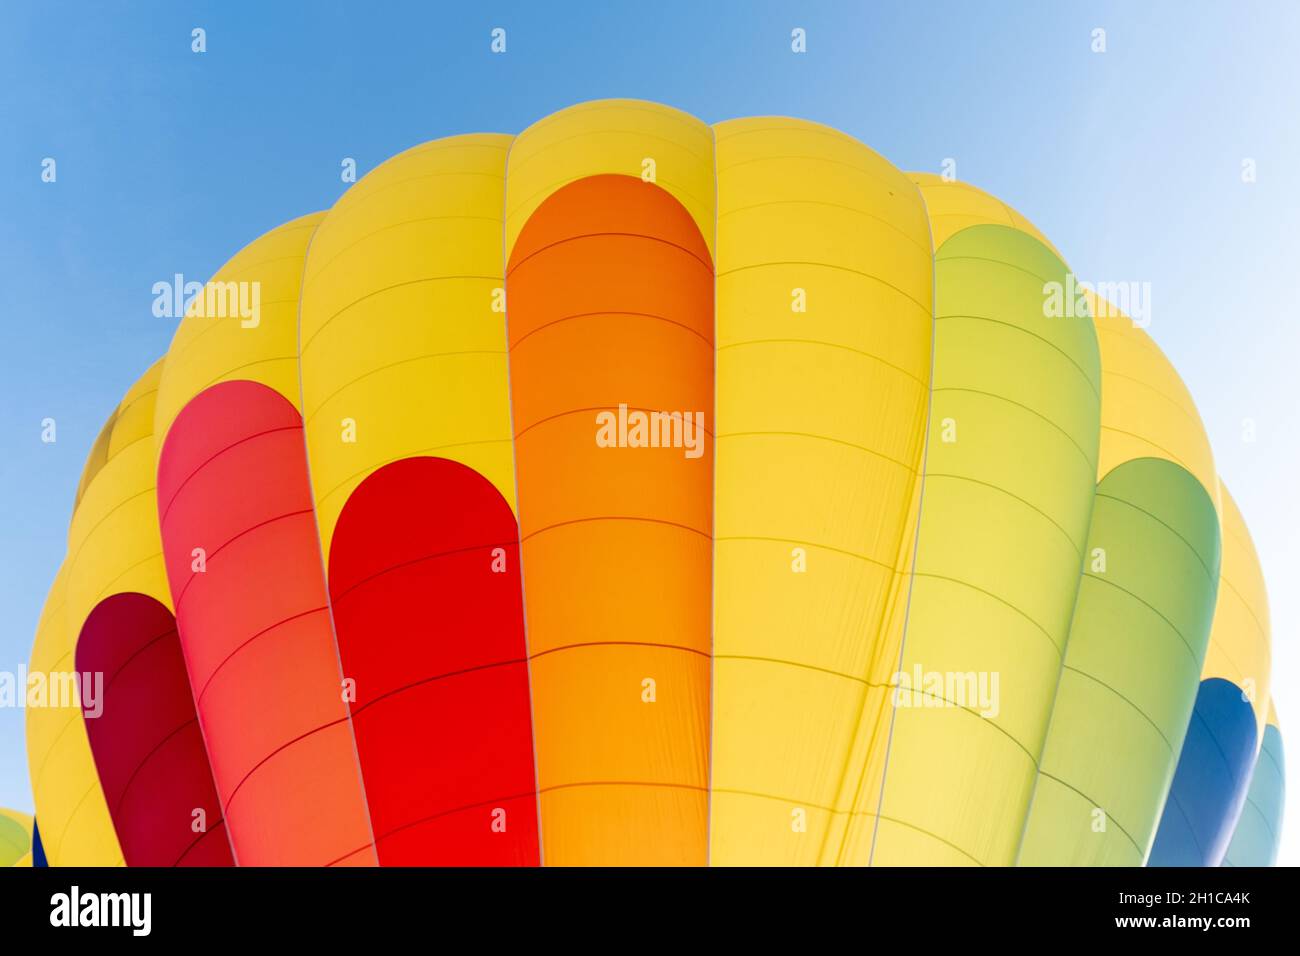 Close-up view of a hot air balloon in green, blue, red and yellow colors Stock Photo